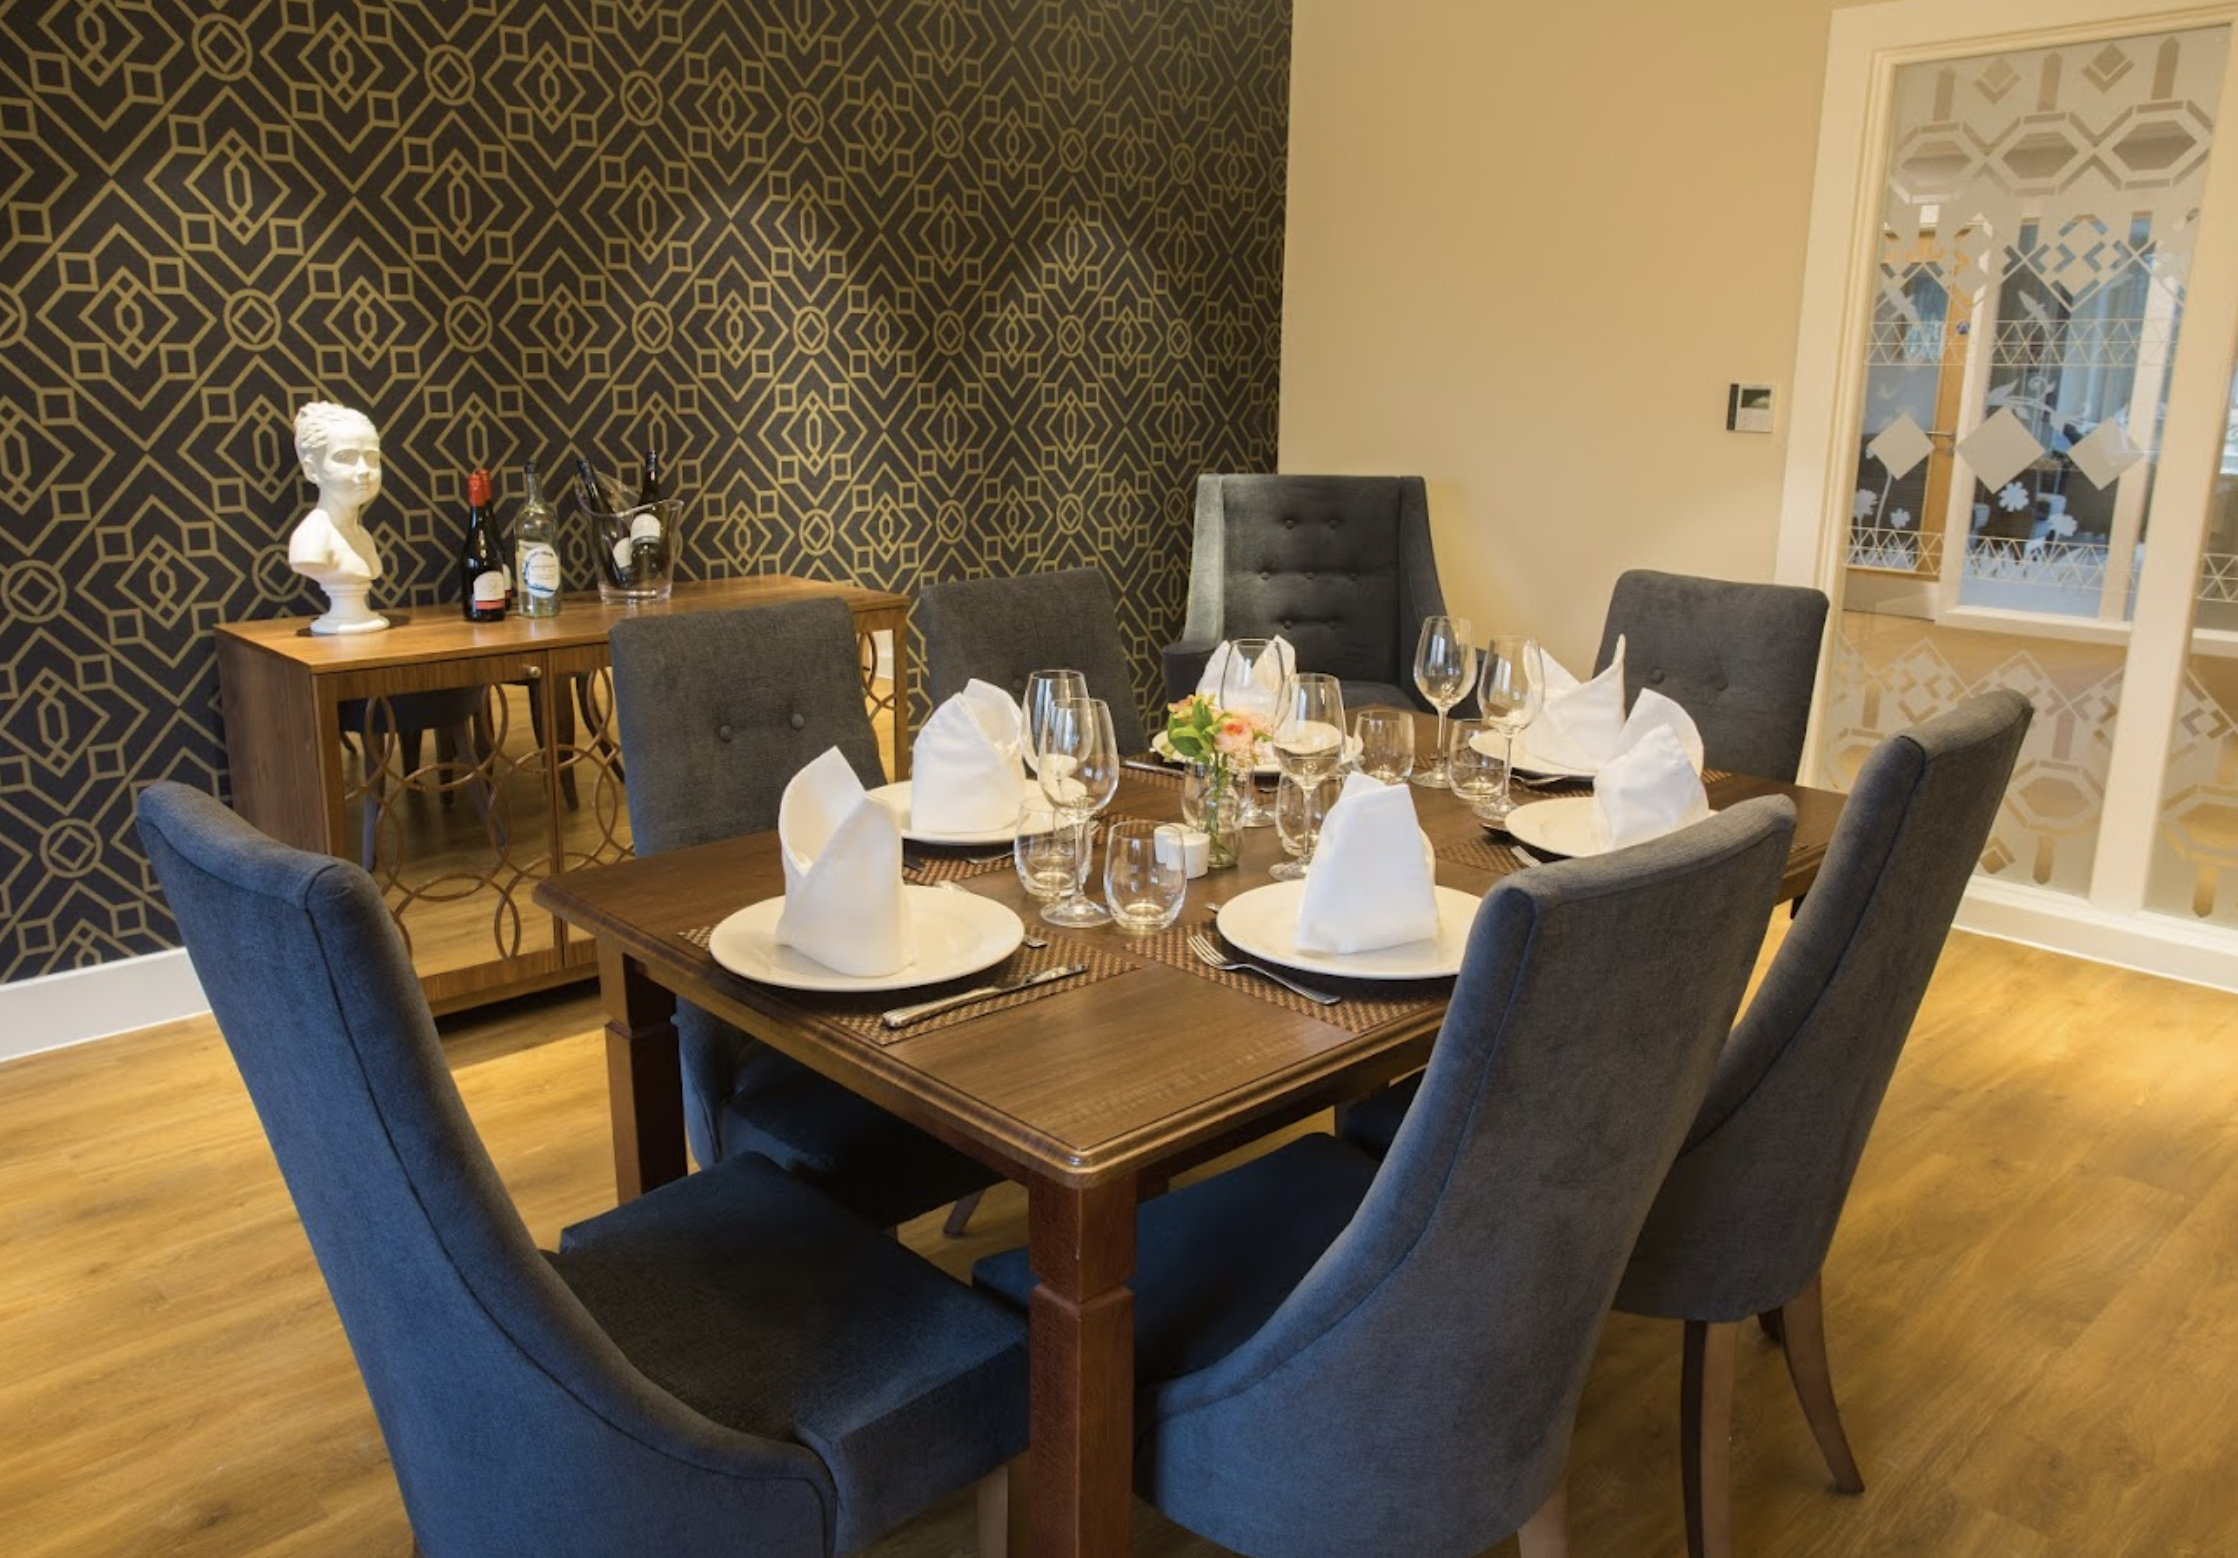 Private Dining Room of The Goldbridge care home in Haywards Health, Sussex